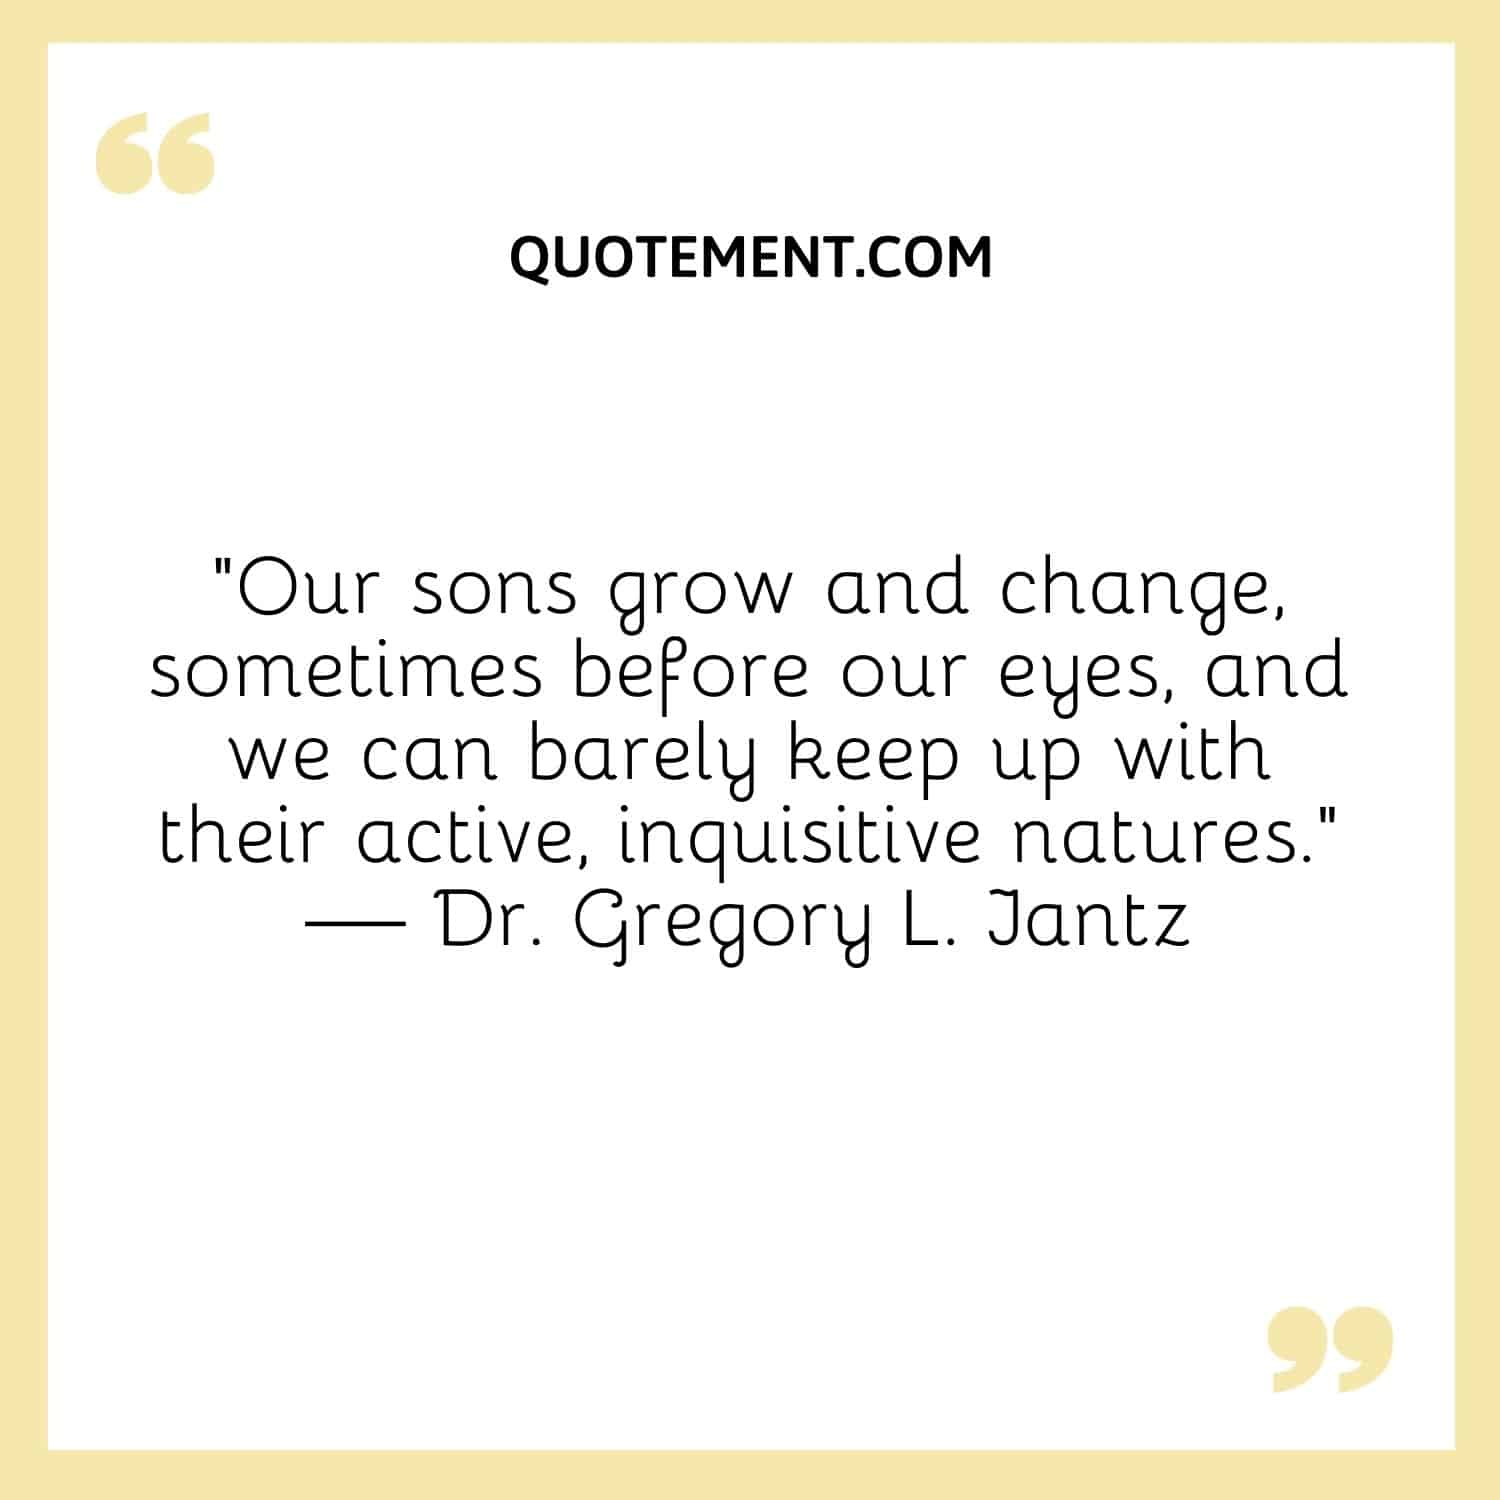 Our sons grow and change